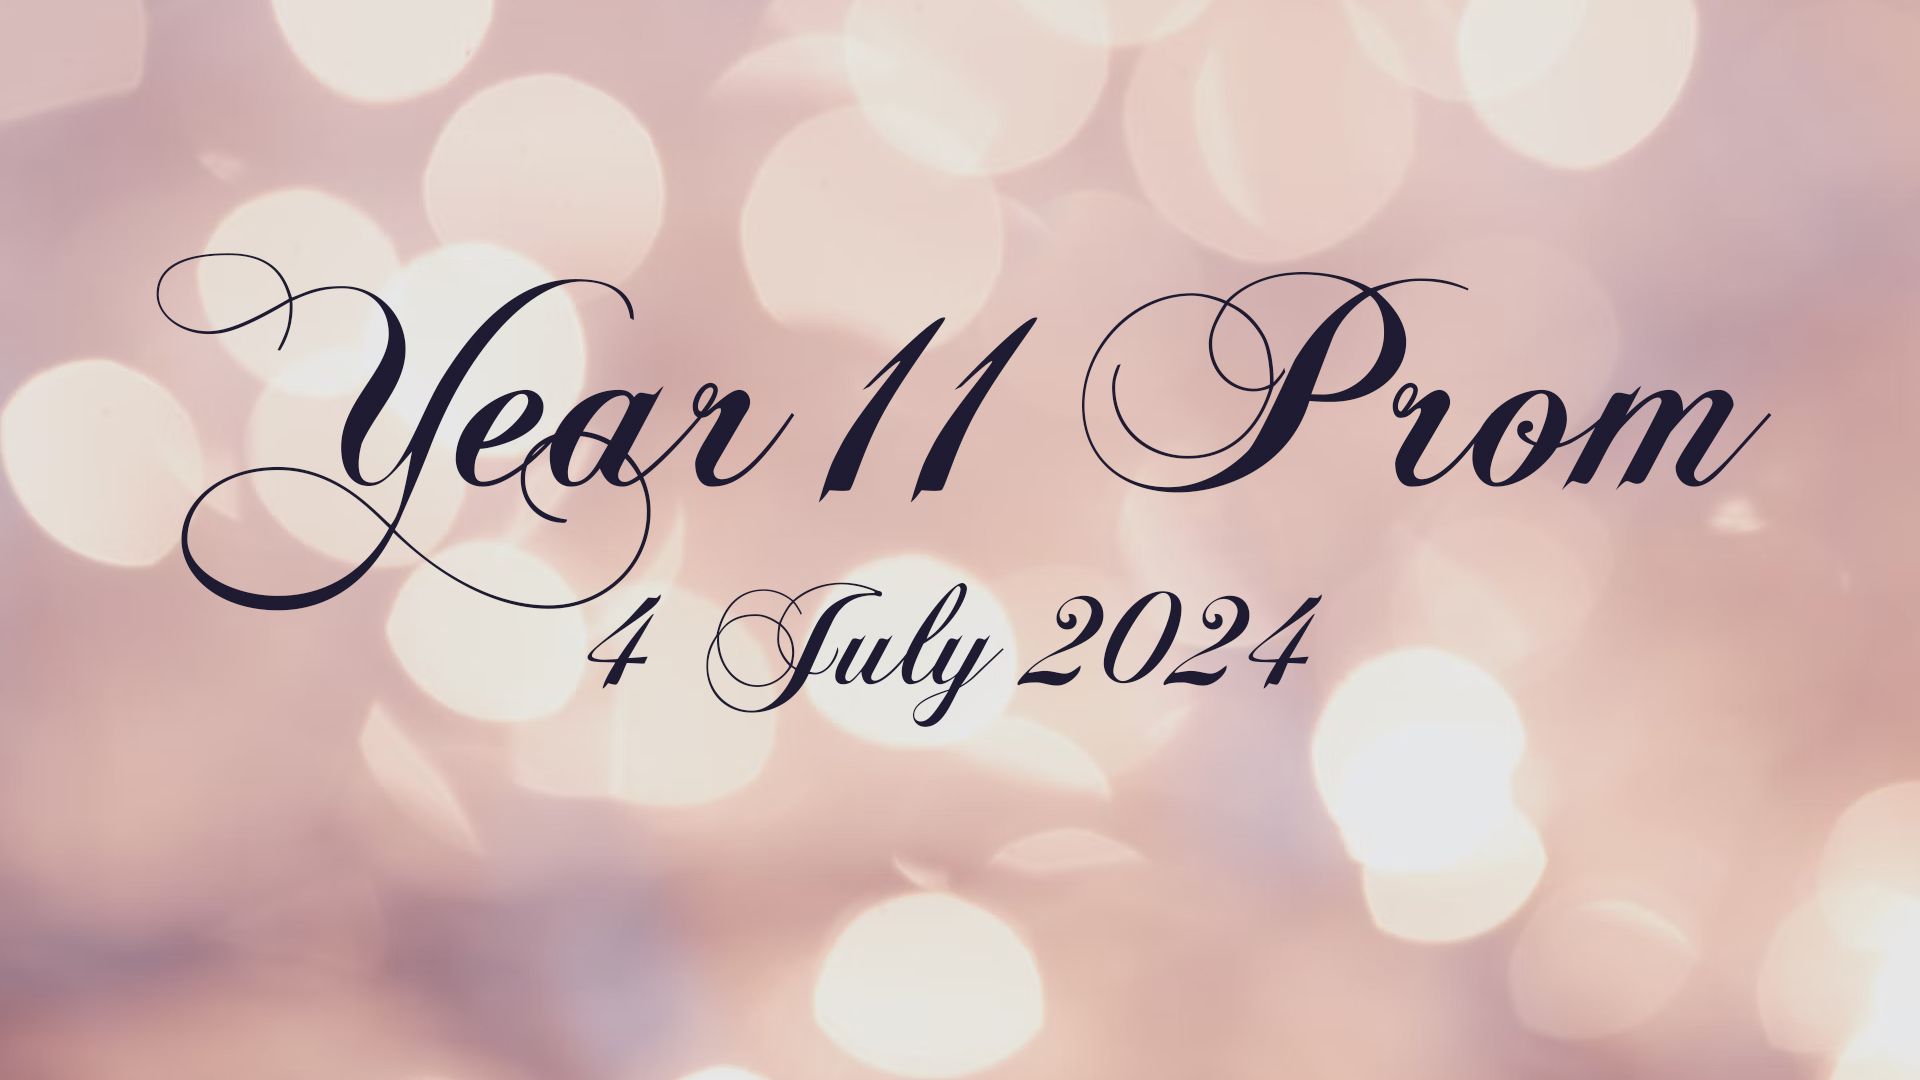 Year 11 Prom – 4 July 2024